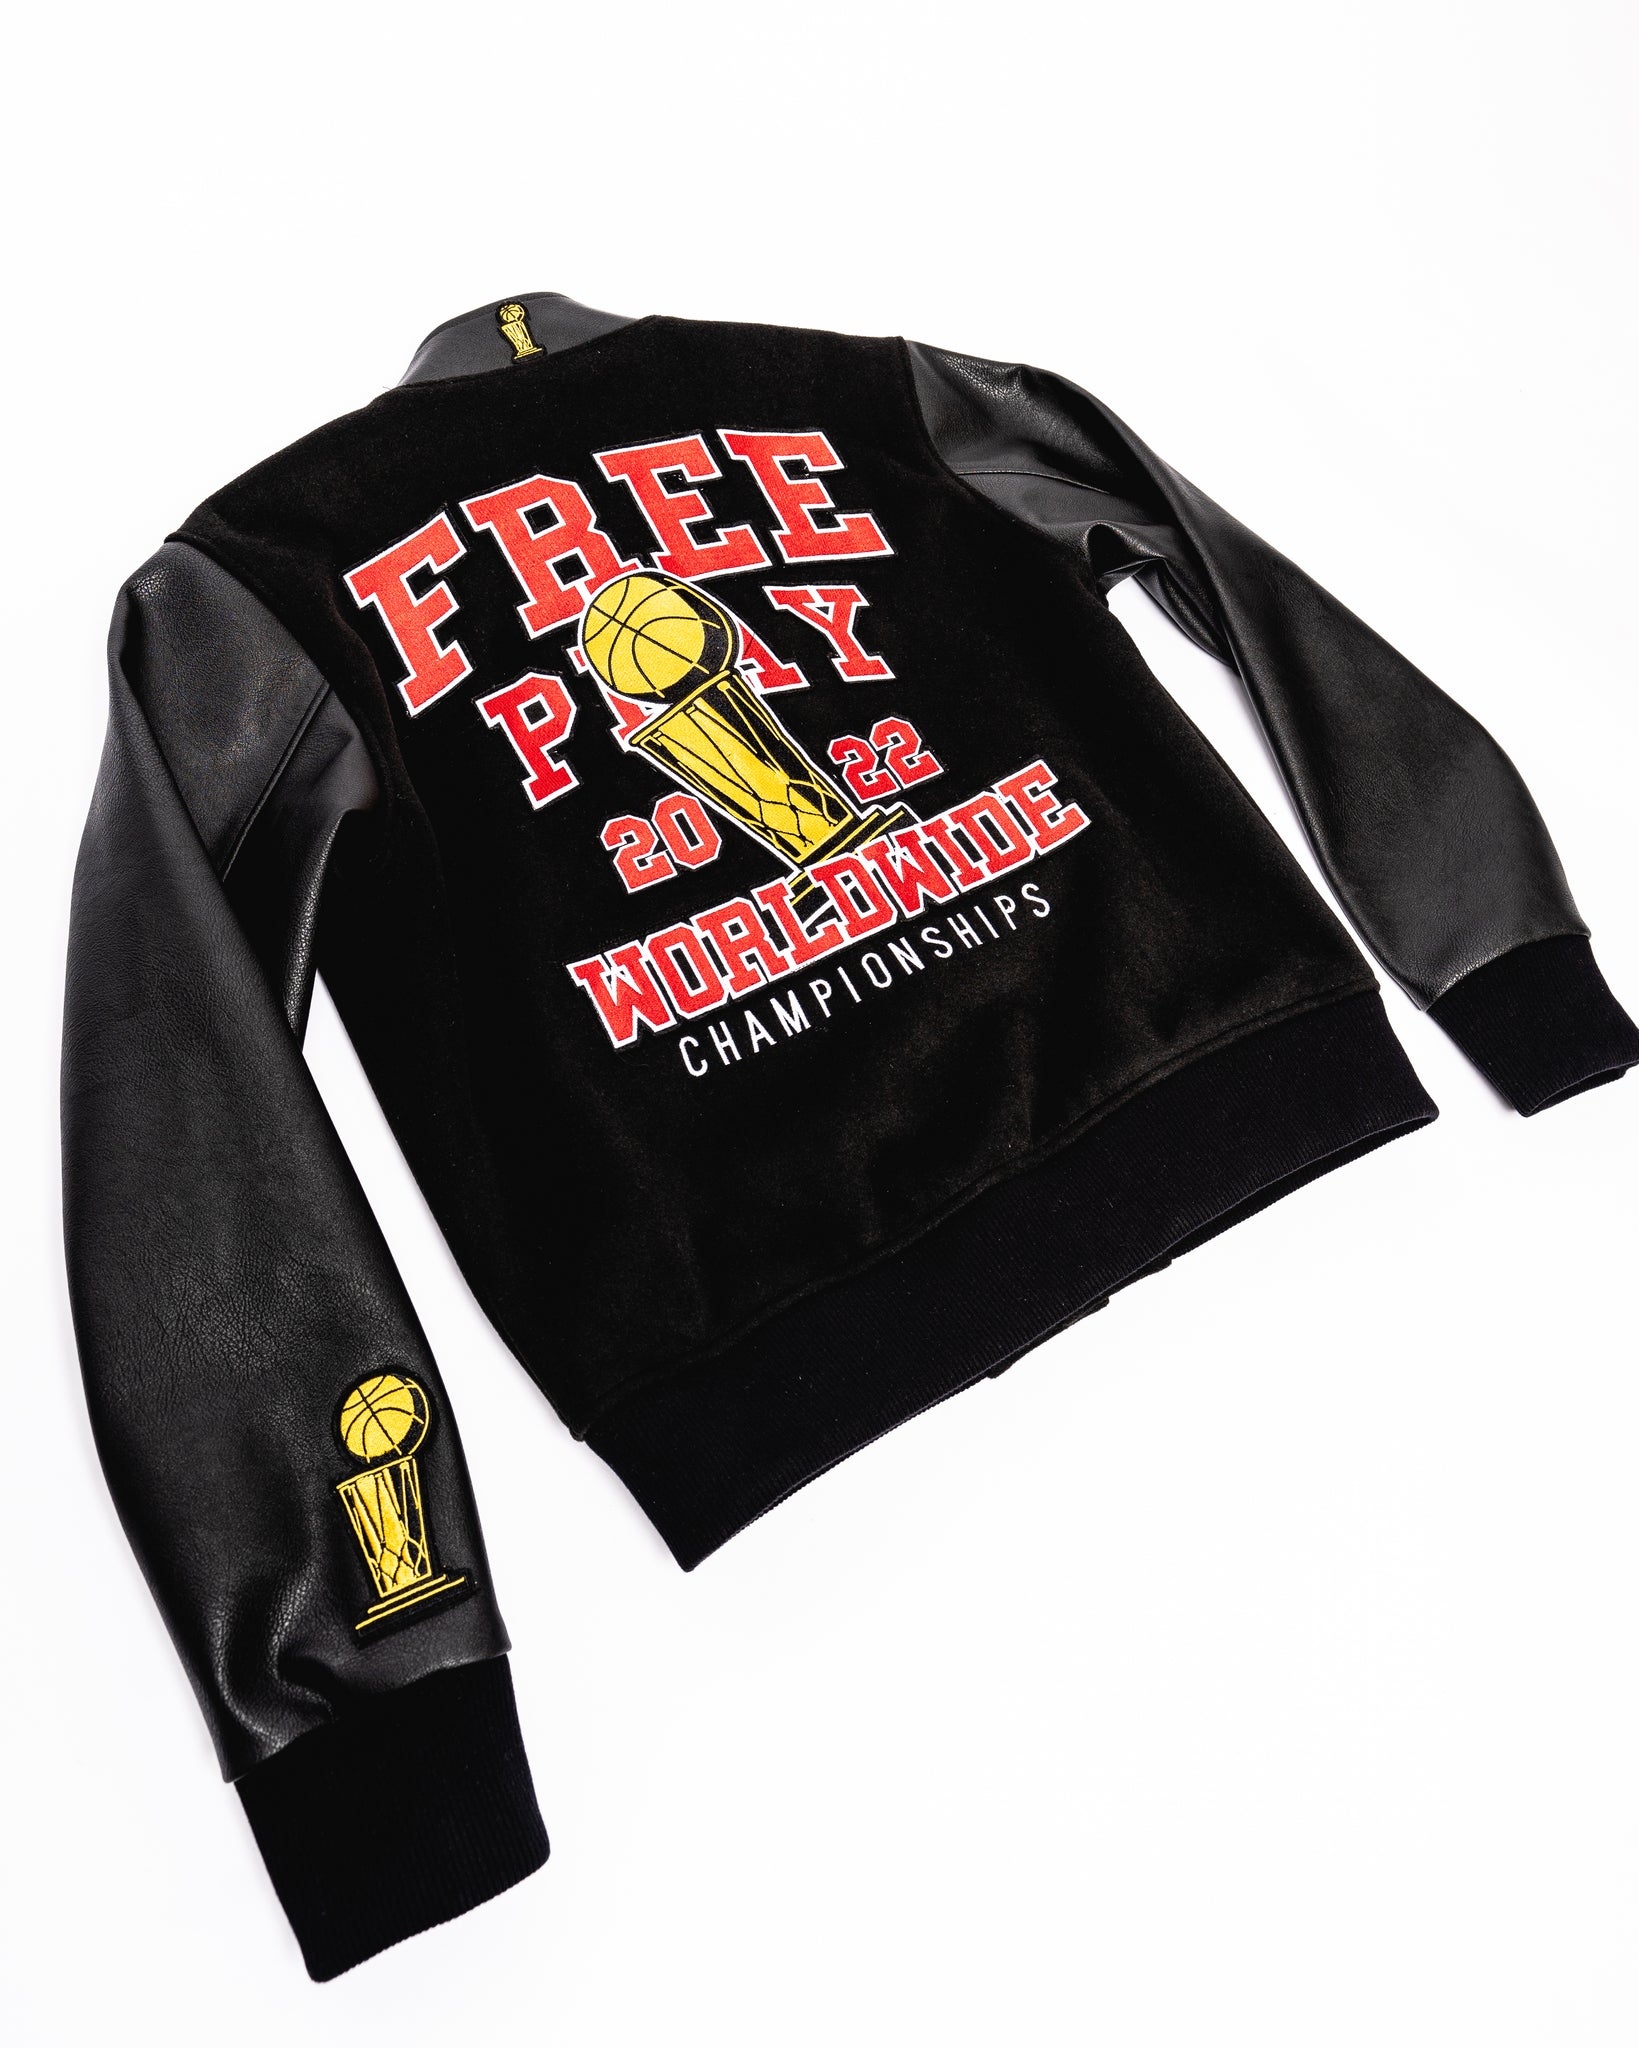 Free Play Music Group Limited Edition "Varsity Jacket" *Pre-Order*